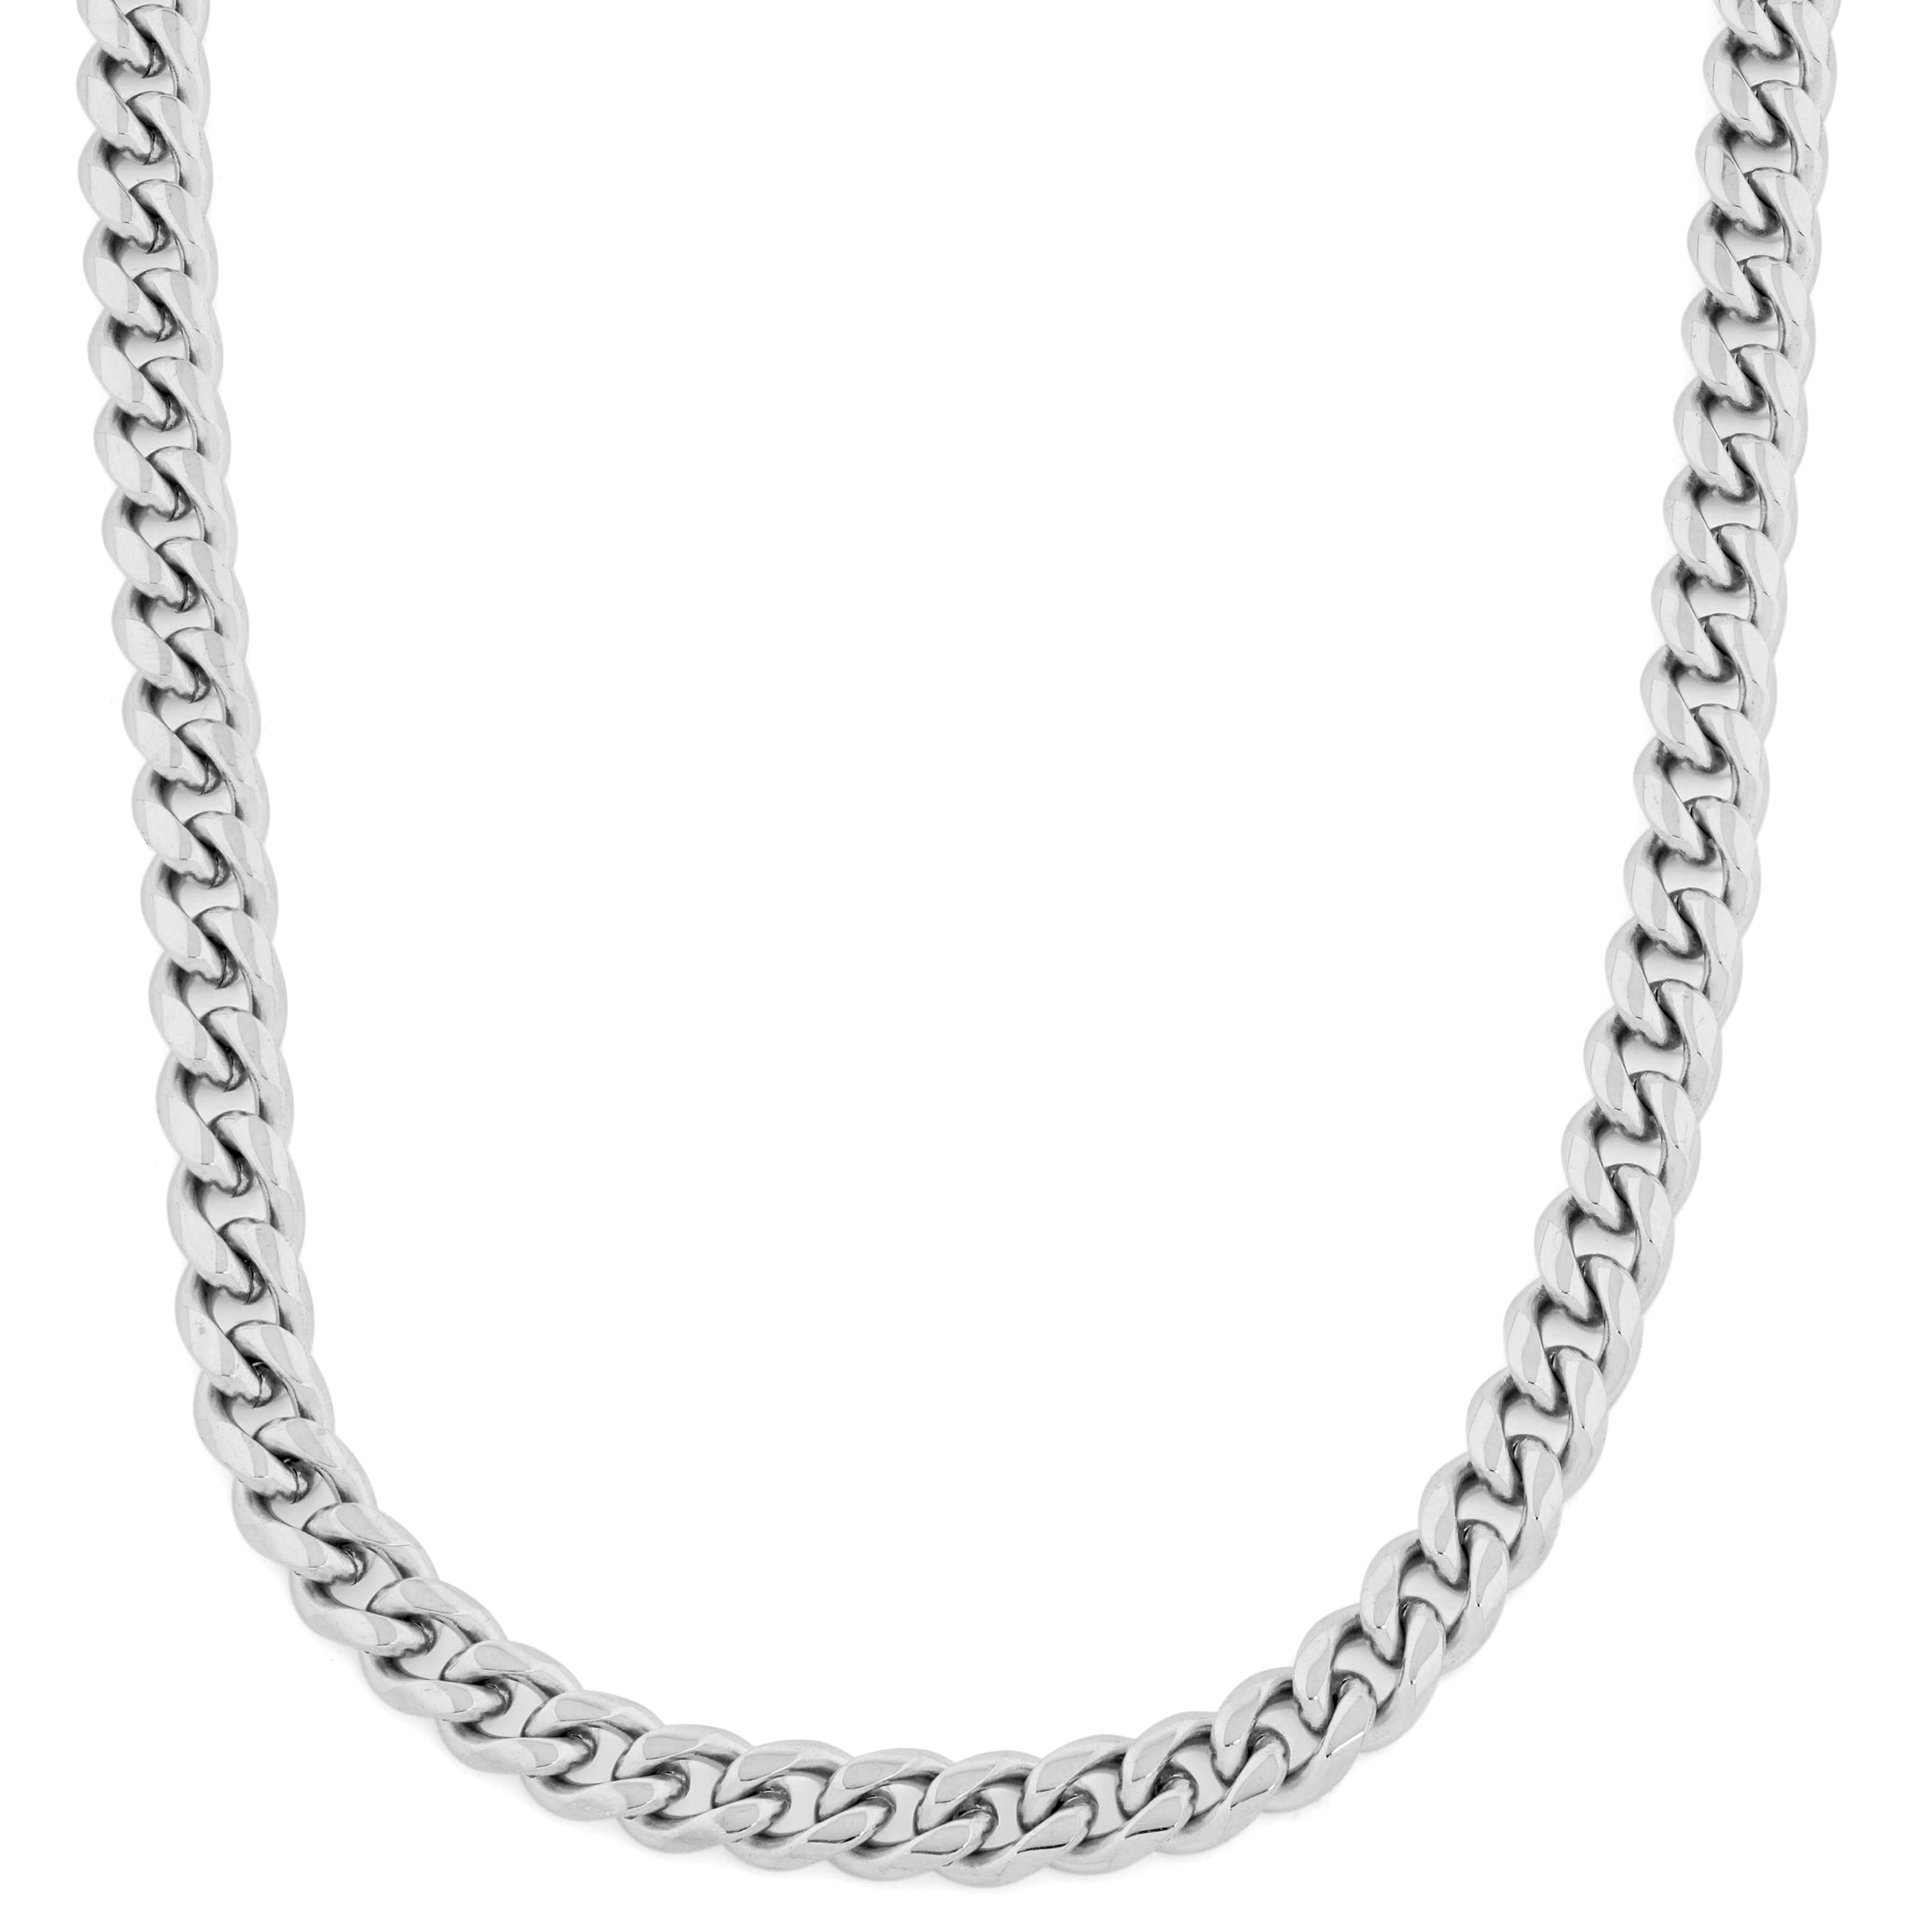 10 mm Silver-Tone Chain Necklace